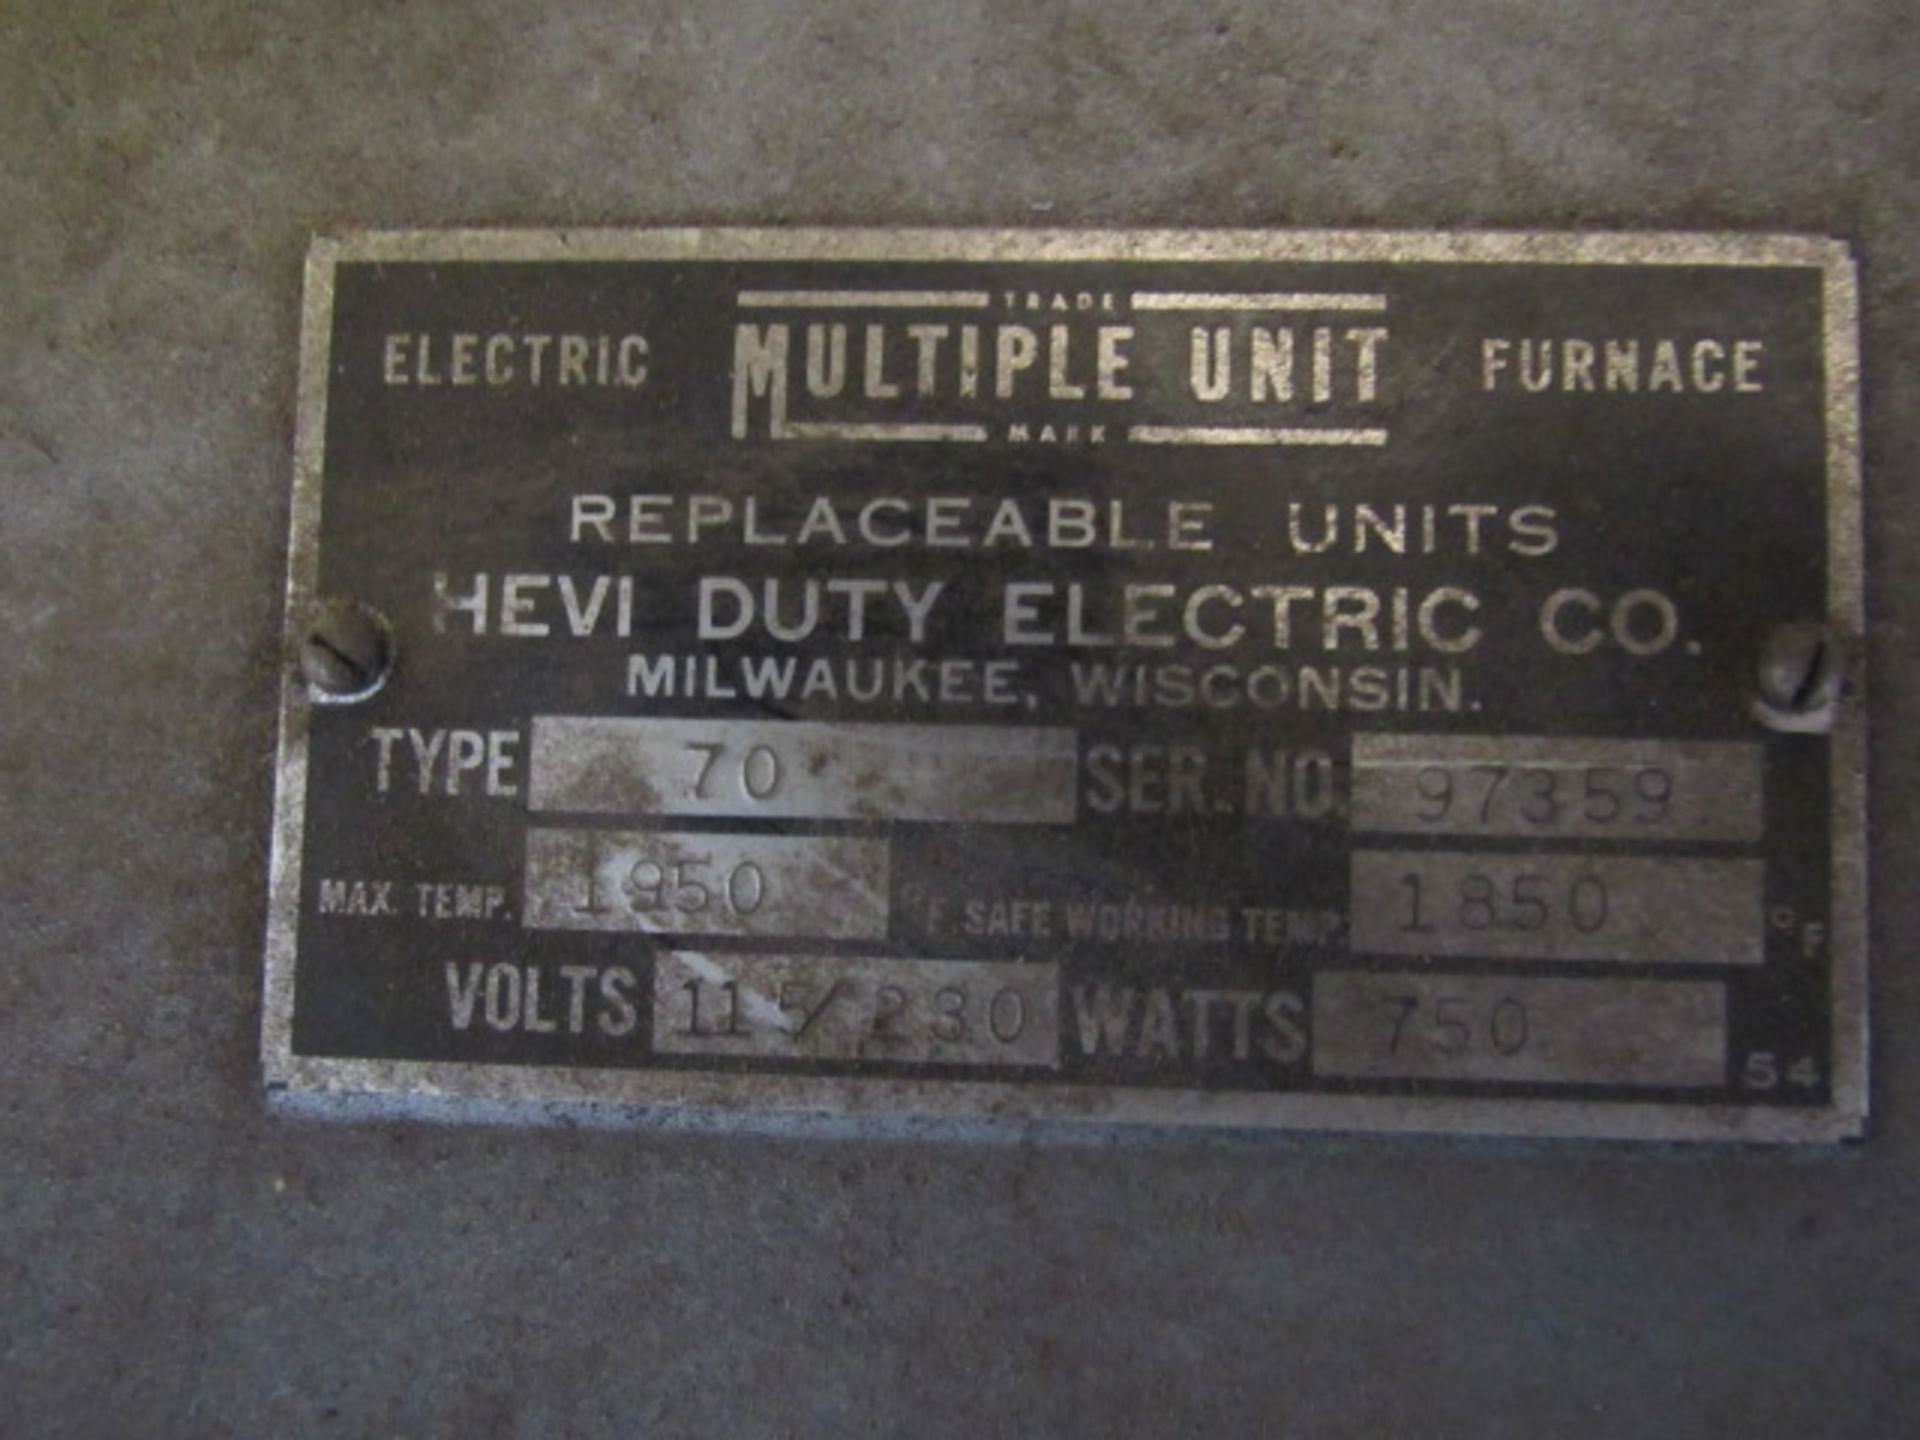 Hevi-Duty Type 70 1950 Degree Electric Furnace - Image 3 of 3